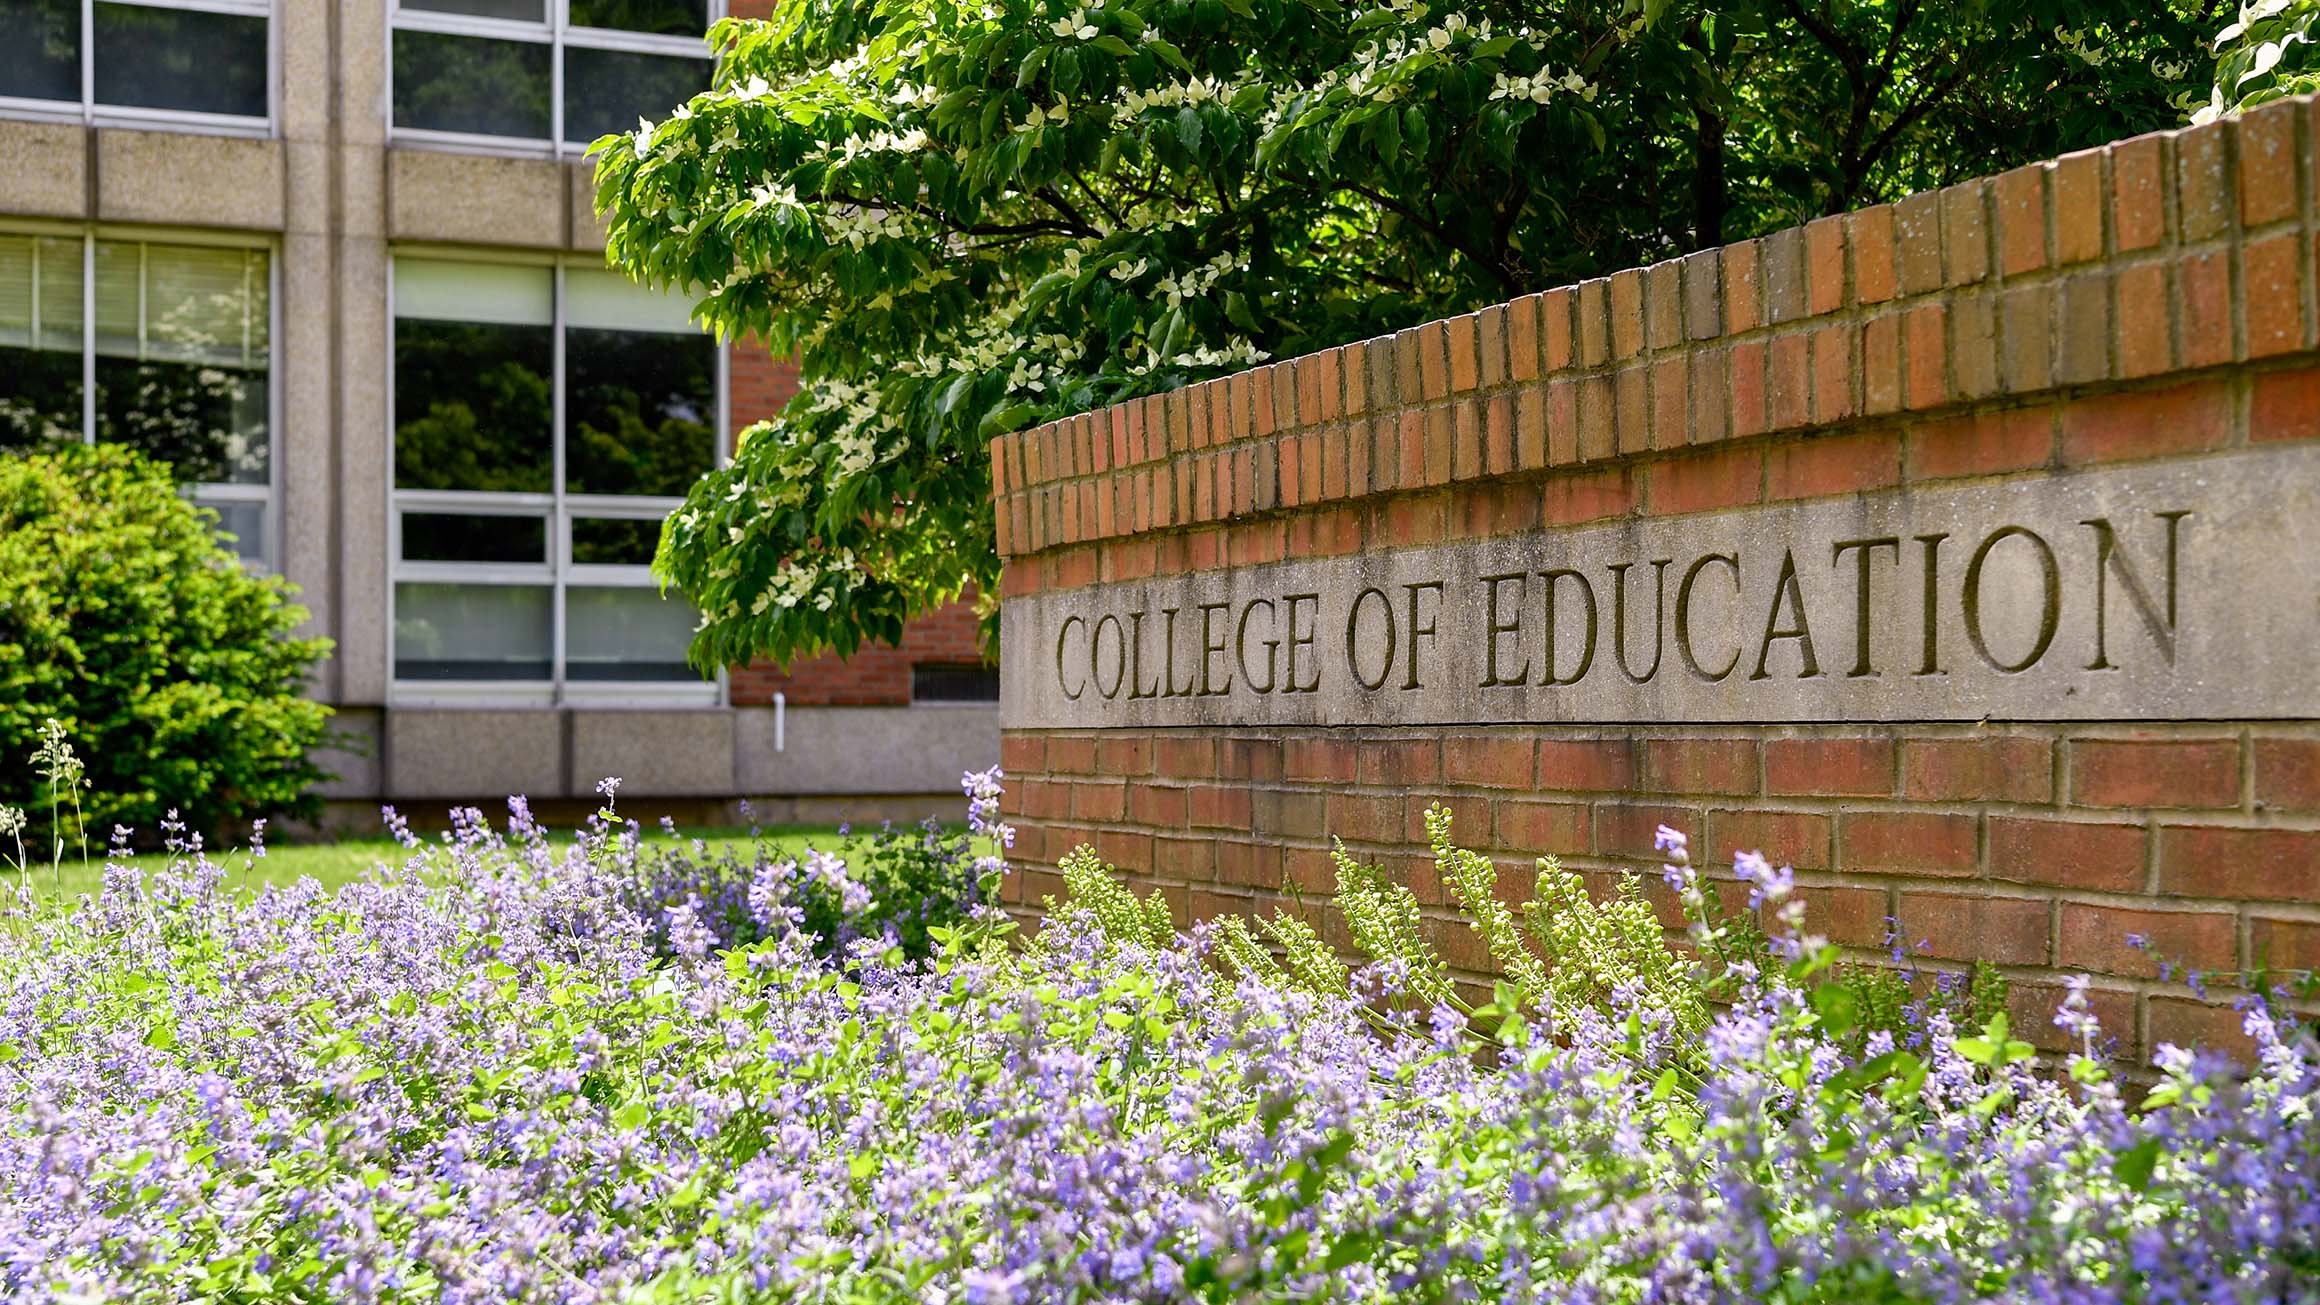 The name of the College of Education at Penn State is displayed on a brick wall.